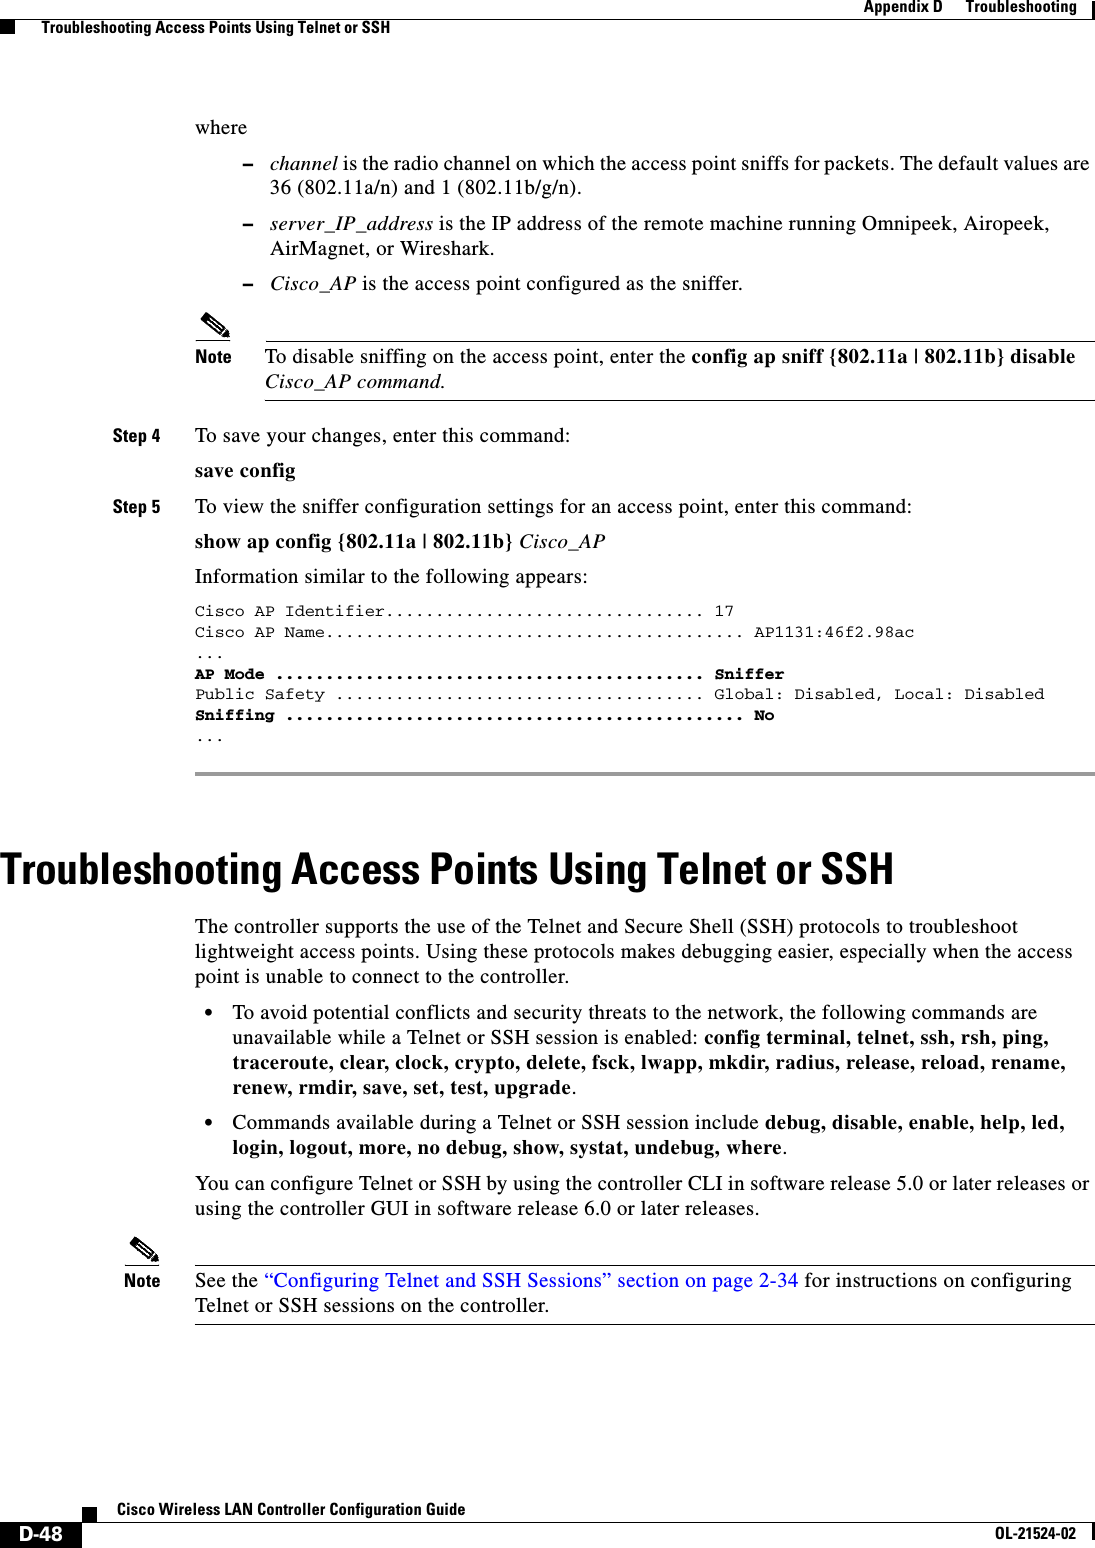  D-48Cisco Wireless LAN Controller Configuration GuideOL-21524-02Appendix D      Troubleshooting  Troubleshooting Access Points Using Telnet or SSHwhere   –channel is the radio channel on which the access point sniffs for packets. The default values are 36 (802.11a/n) and 1 (802.11b/g/n).  –server_IP_address is the IP address of the remote machine running Omnipeek, Airopeek, AirMagnet, or Wireshark.  –Cisco_AP is the access point configured as the sniffer.Note To disable sniffing on the access point, enter the config ap sniff {802.11a | 802.11b} disable Cisco_AP command.Step 4 To save your changes, enter this command:save configStep 5 To view the sniffer configuration settings for an access point, enter this command: show ap config {802.11a | 802.11b} Cisco_APInformation similar to the following appears: Cisco AP Identifier................................ 17 Cisco AP Name.......................................... AP1131:46f2.98ac... AP Mode ........................................... Sniffer Public Safety ..................................... Global: Disabled, Local: Disabled Sniffing .............................................. No ... Troubleshooting Access Points Using Telnet or SSHThe controller supports the use of the Telnet and Secure Shell (SSH) protocols to troubleshoot lightweight access points. Using these protocols makes debugging easier, especially when the access point is unable to connect to the controller.  • To avoid potential conflicts and security threats to the network, the following commands are unavailable while a Telnet or SSH session is enabled: config terminal, telnet, ssh, rsh, ping, traceroute, clear, clock, crypto, delete, fsck, lwapp, mkdir, radius, release, reload, rename, renew, rmdir, save, set, test, upgrade.  • Commands available during a Telnet or SSH session include debug, disable, enable, help, led, login, logout, more, no debug, show, systat, undebug, where.You can configure Telnet or SSH by using the controller CLI in software release 5.0 or later releases or using the controller GUI in software release 6.0 or later releases.Note See the “Configuring Telnet and SSH Sessions” section on page 2-34 for instructions on configuring Telnet or SSH sessions on the controller.